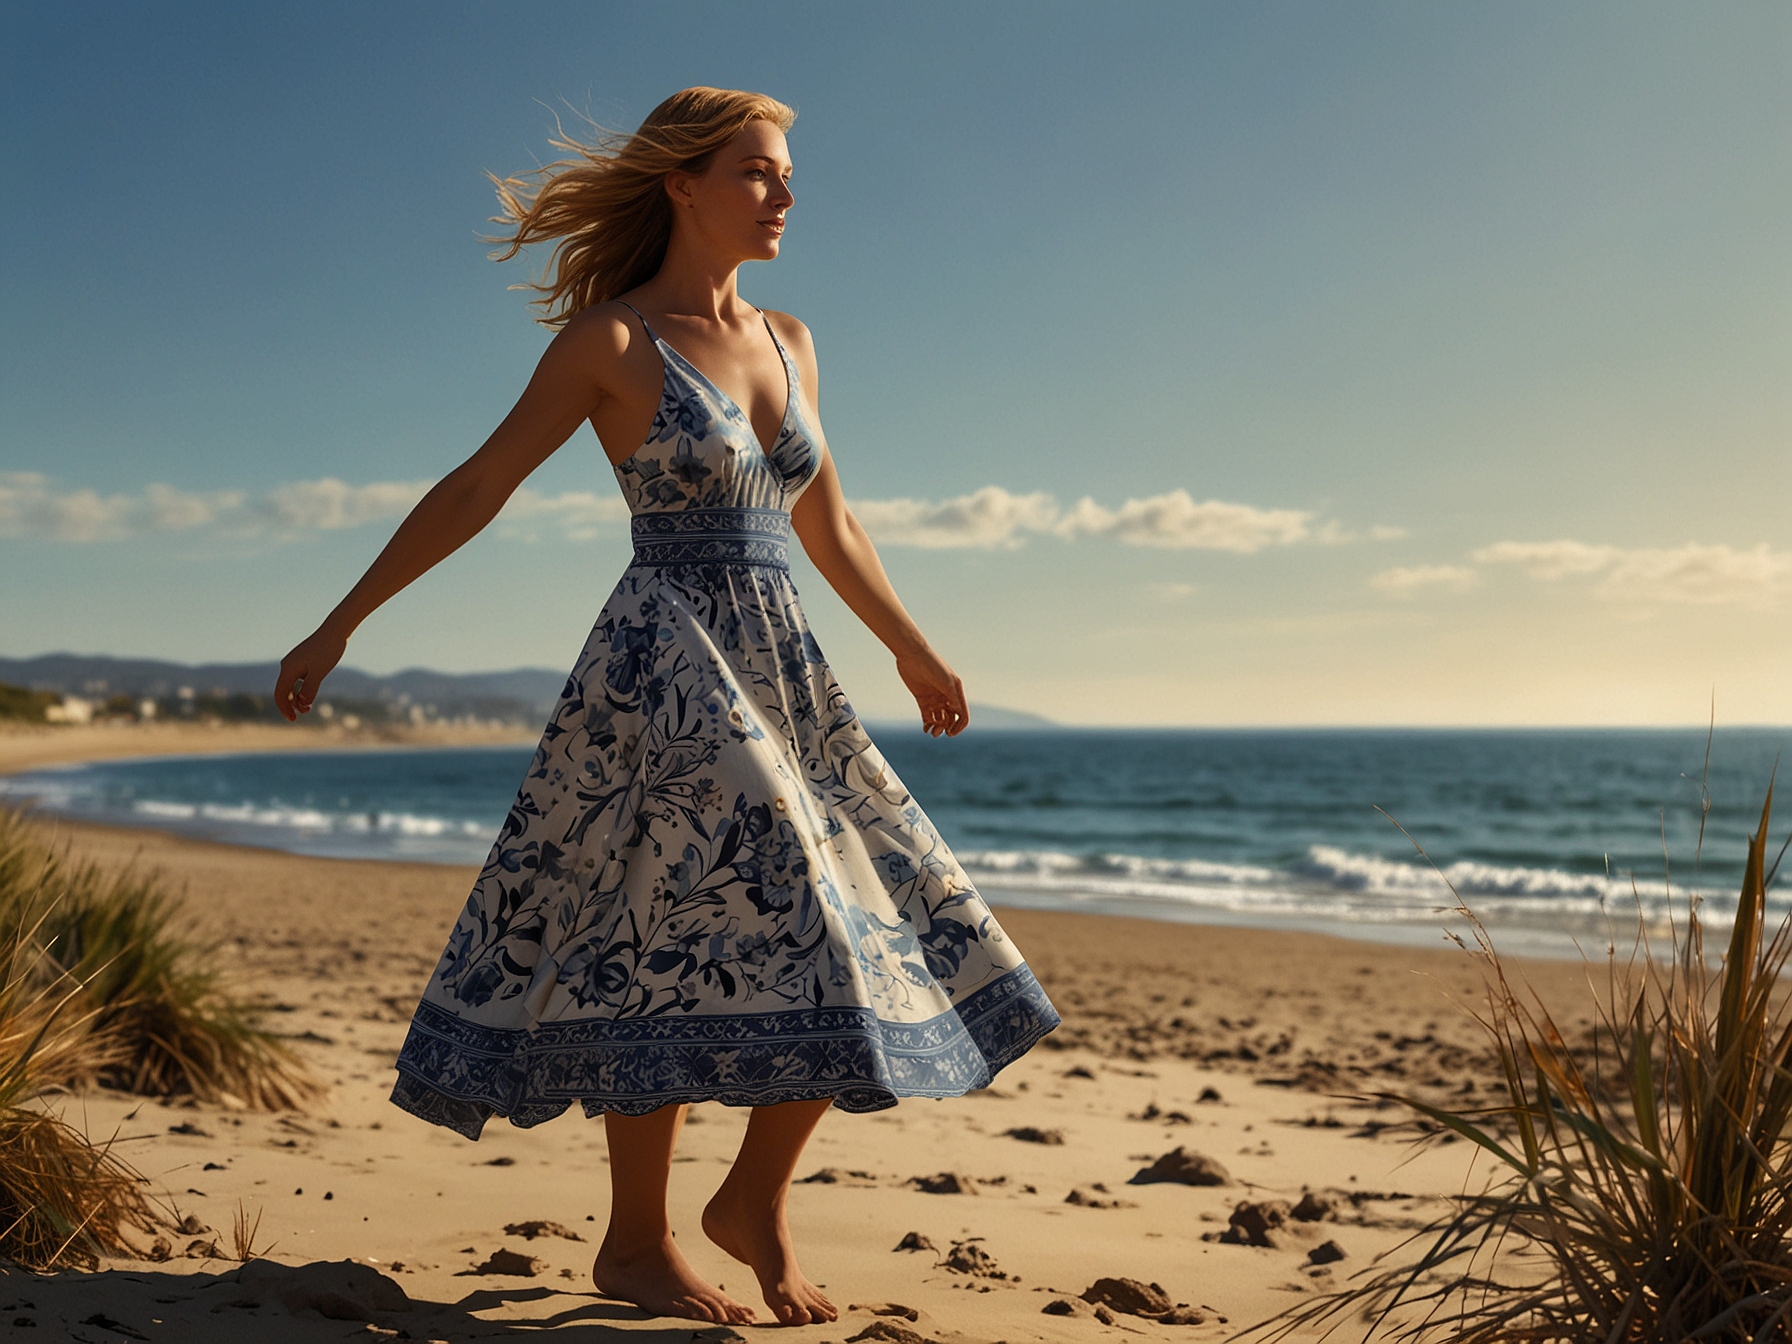 A woman wearing the new M&S dress on the beach, showing off its flattering silhouette and stylish design. The sun shines in the background, highlighting the dress's lightweight fabric.